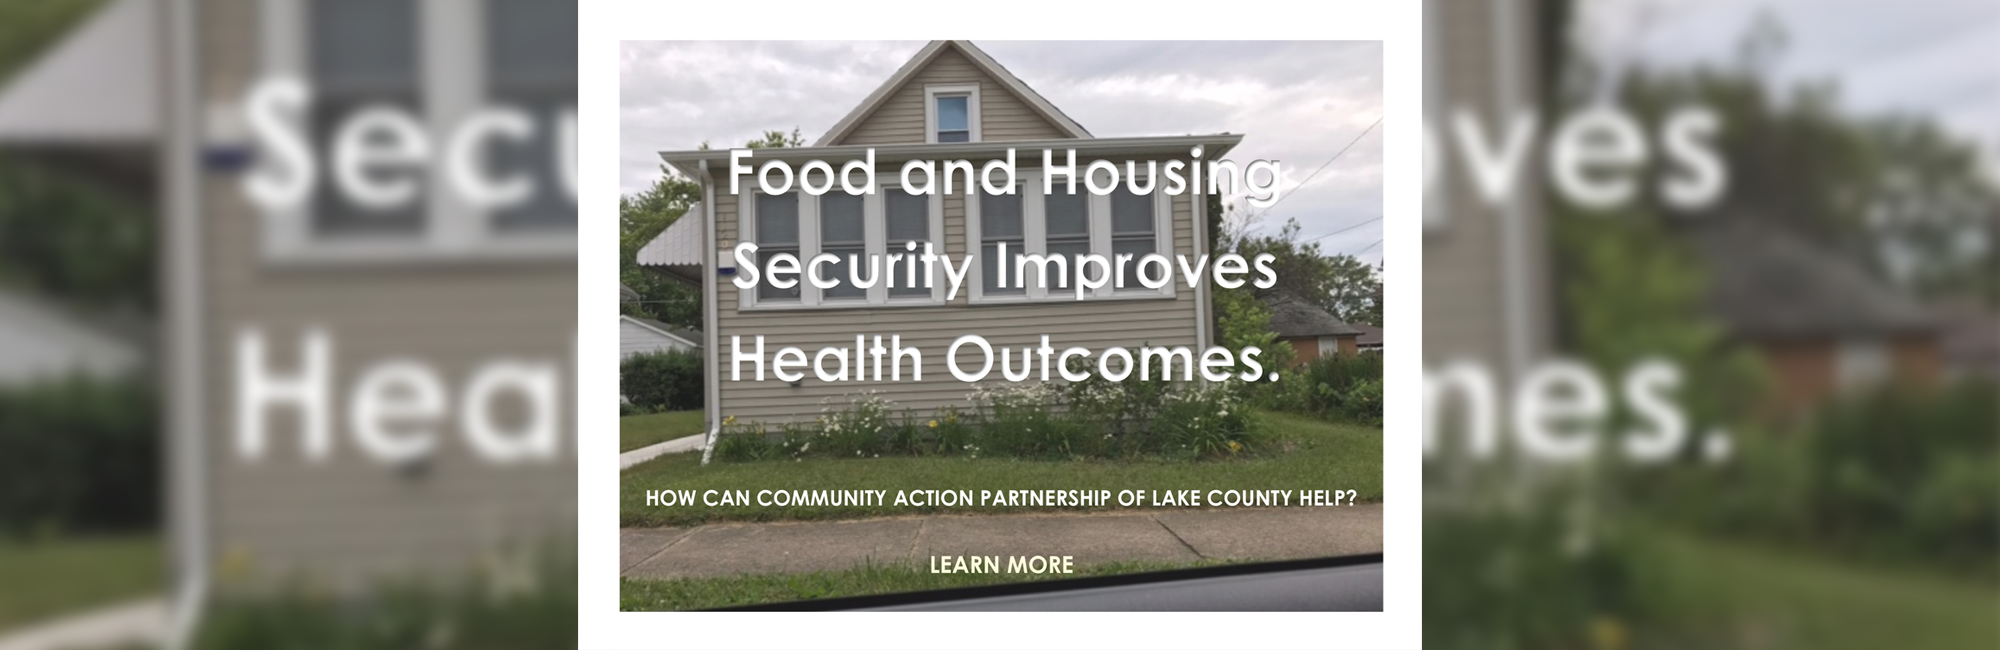 Food and Housing Security Improves Health Outcomes